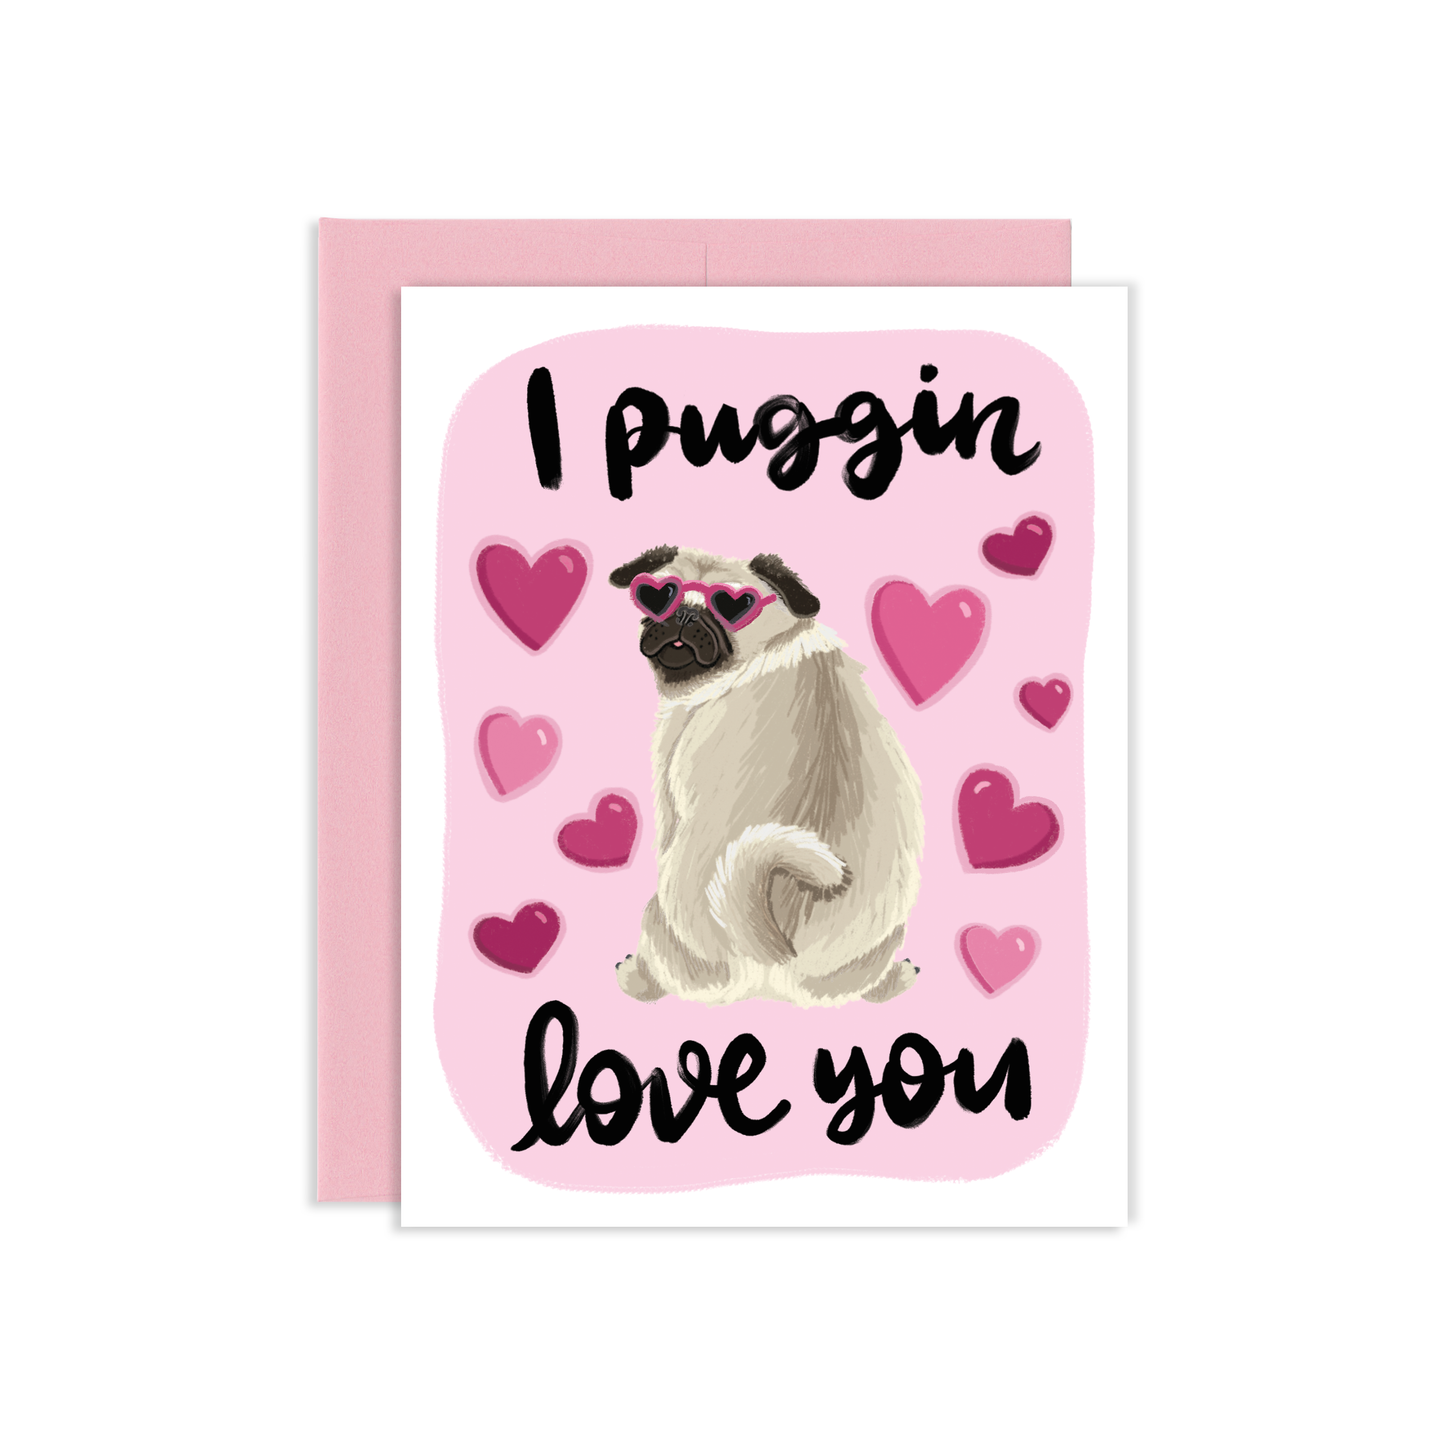 Cats & Dogs Greeting Card + Pen Bundle